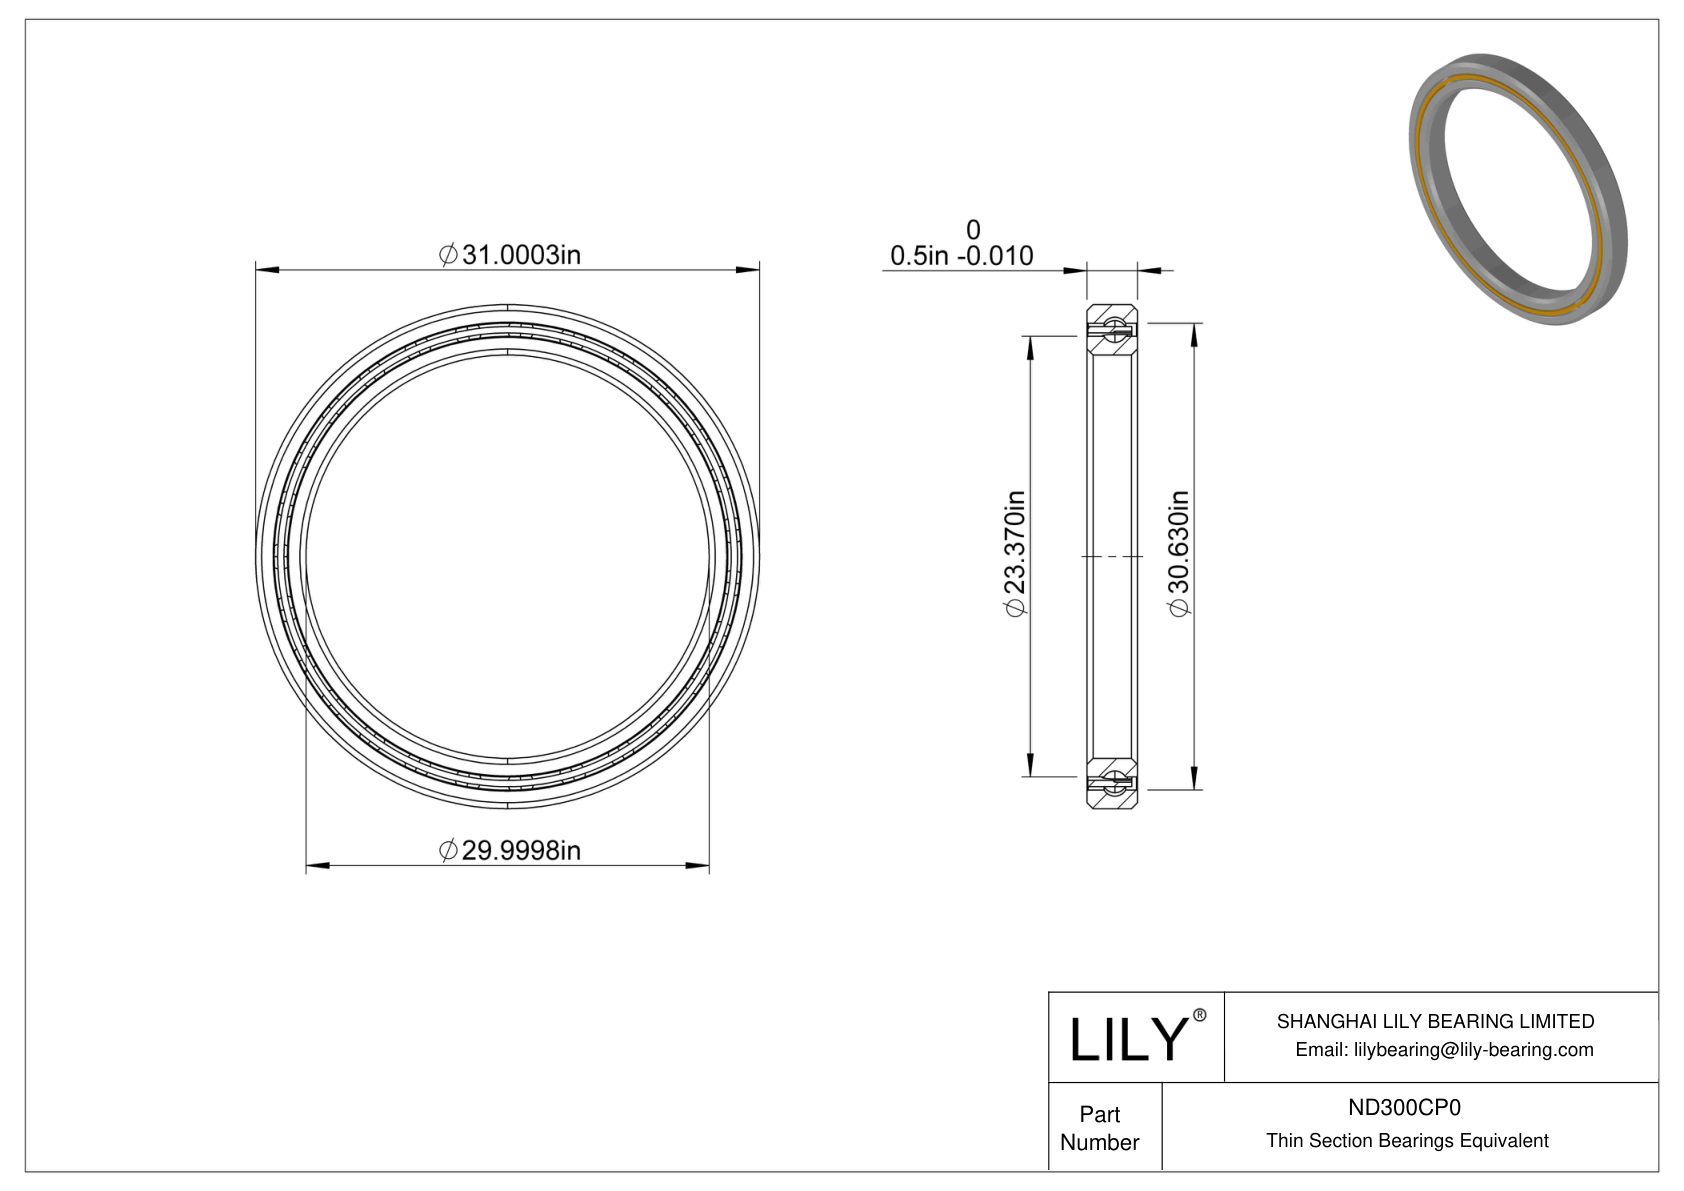 ND300CP0 Constant Section (CS) Bearings cad drawing